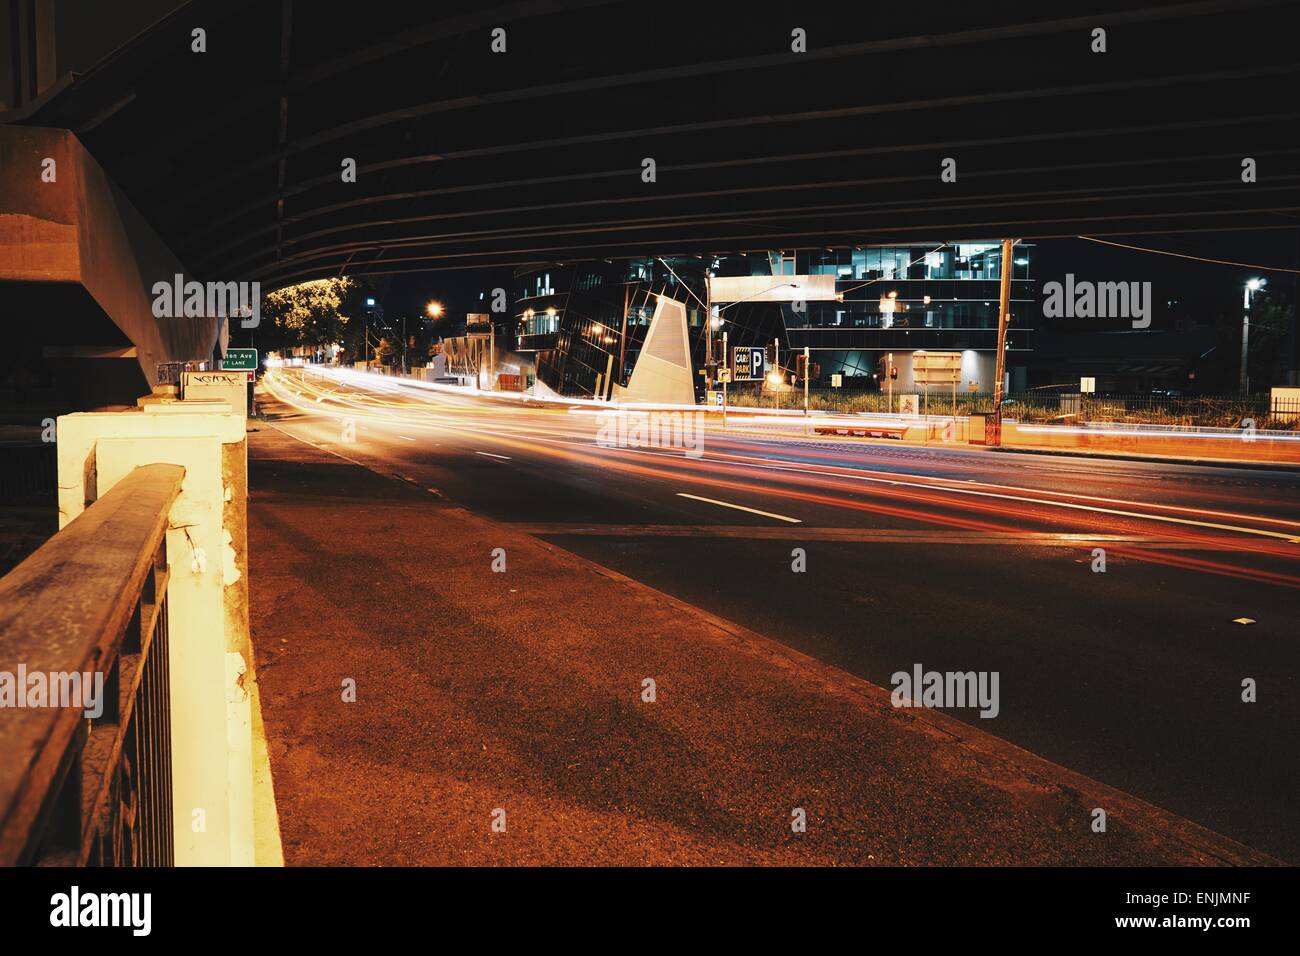 Busy night traffic light trails on Punt rRad in Melbourne, Victoria, Asutralia. Stock Photo